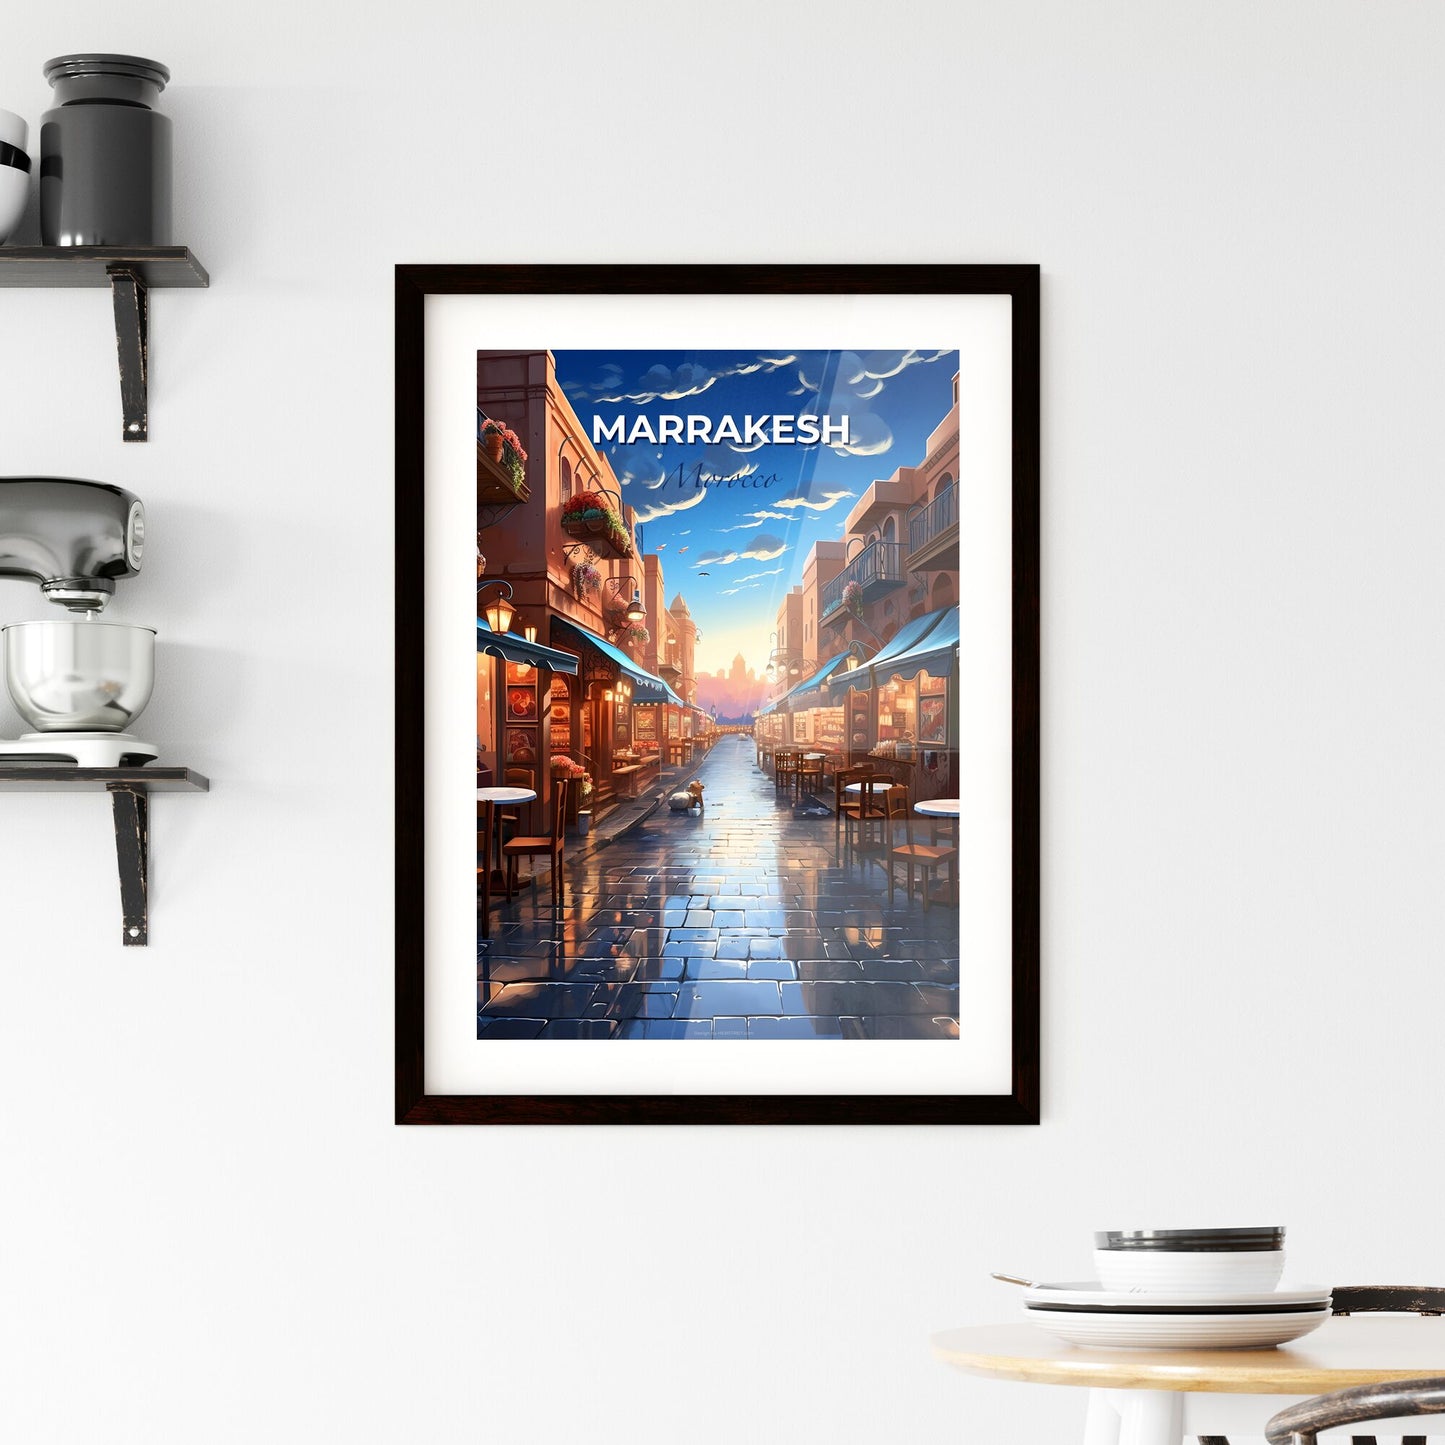 Artistic Marrakesh Skyline - Vibrant Painting with Street Scene and Outdoor Seating Default Title